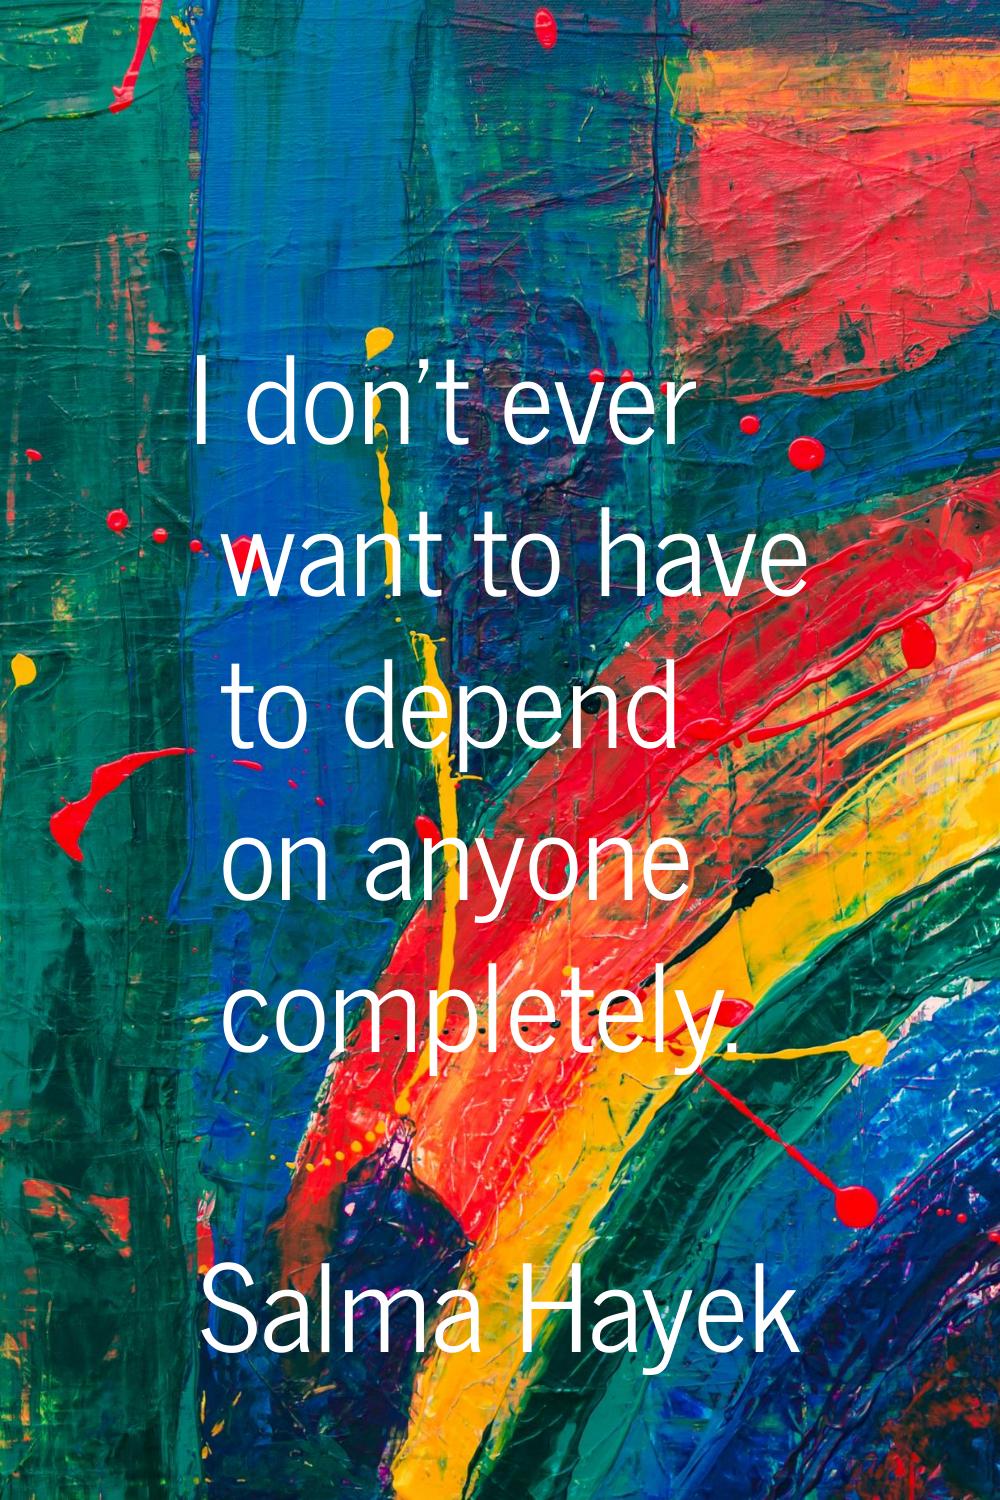 I don't ever want to have to depend on anyone completely.